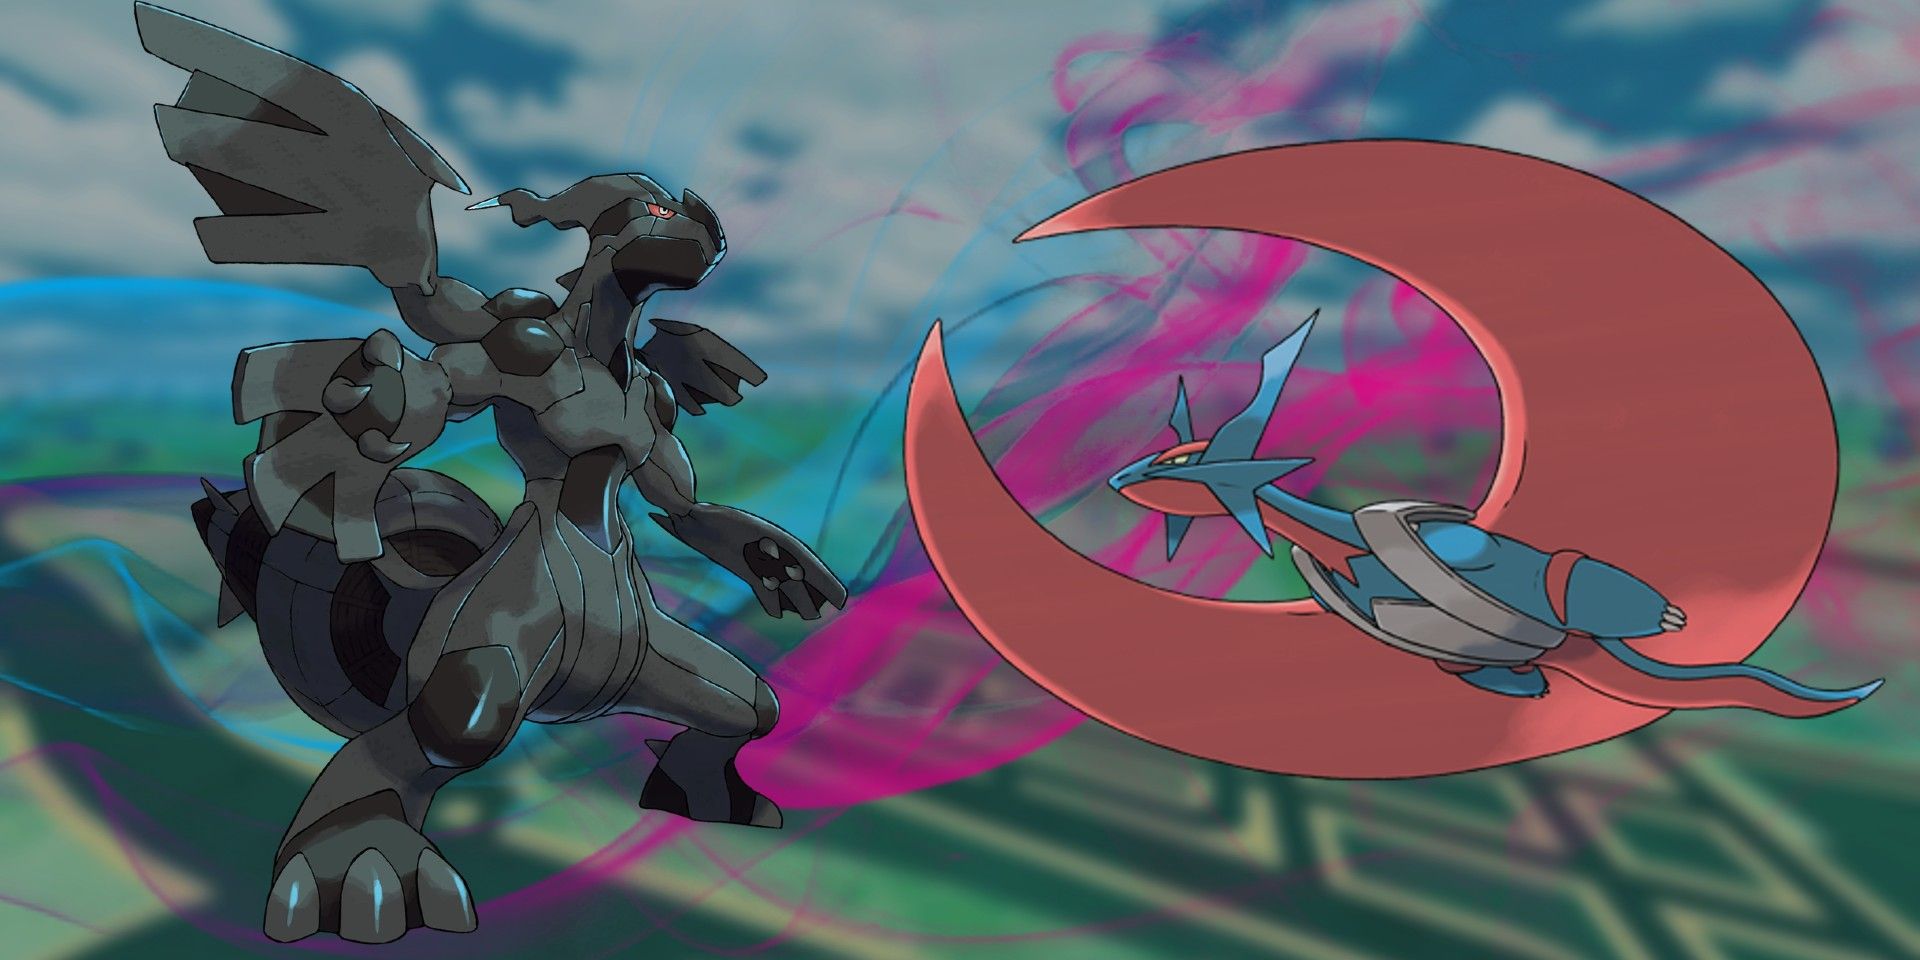 Pokemon's Zekrom to the left and Mega Salamence to the right. Behind them is a blue and dark pink mist effect with Pokémon GO's layout in the background.